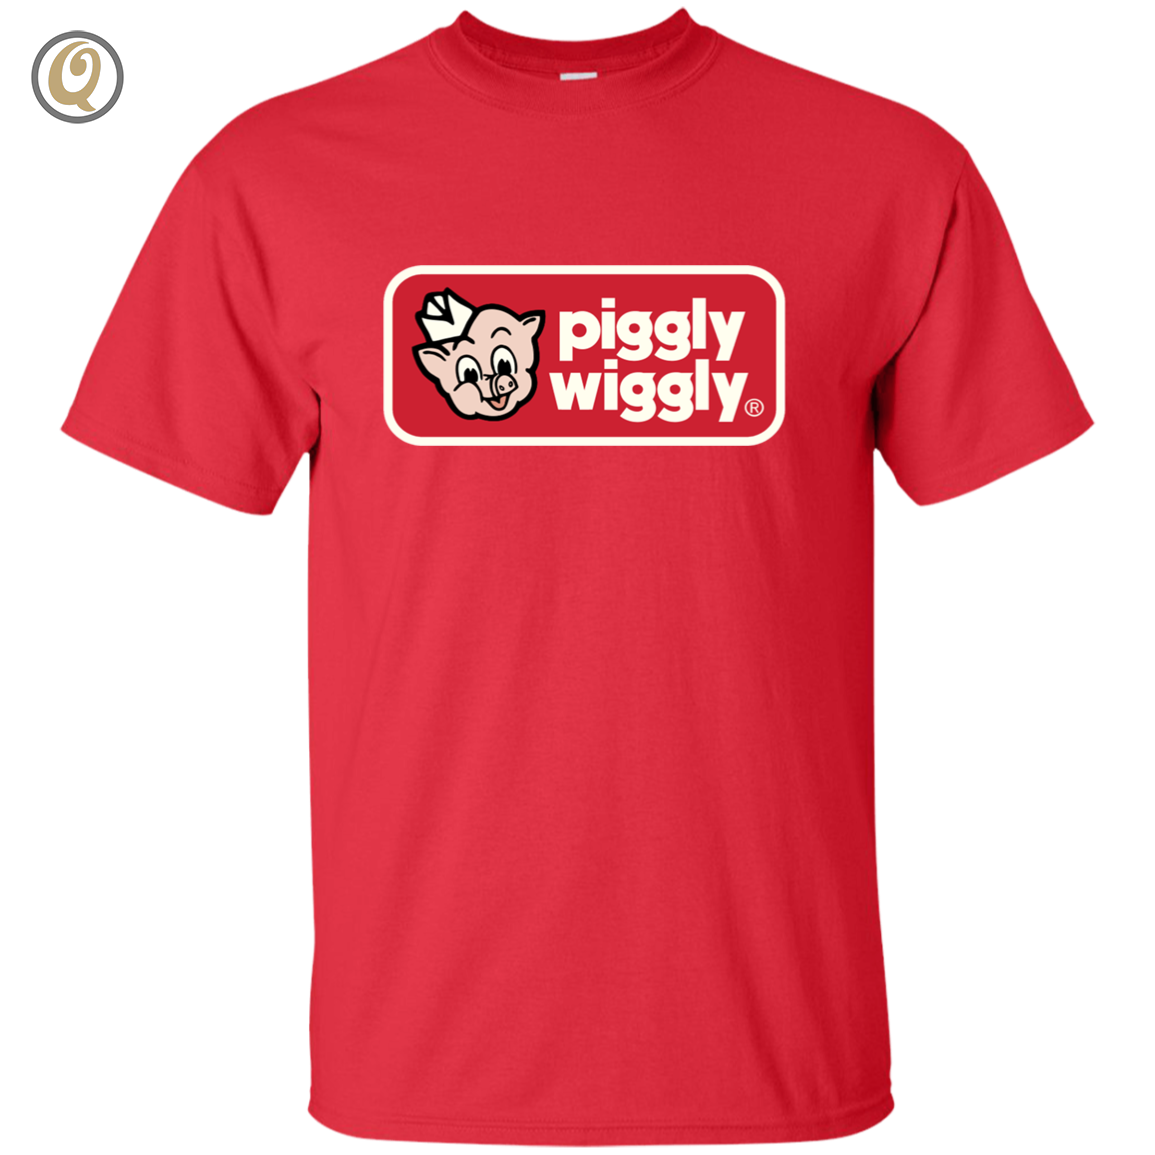 Piggly Wiggly, Pig, Funny, Cotton-T-Shirt - Red - T-Shirts, Tank Tops